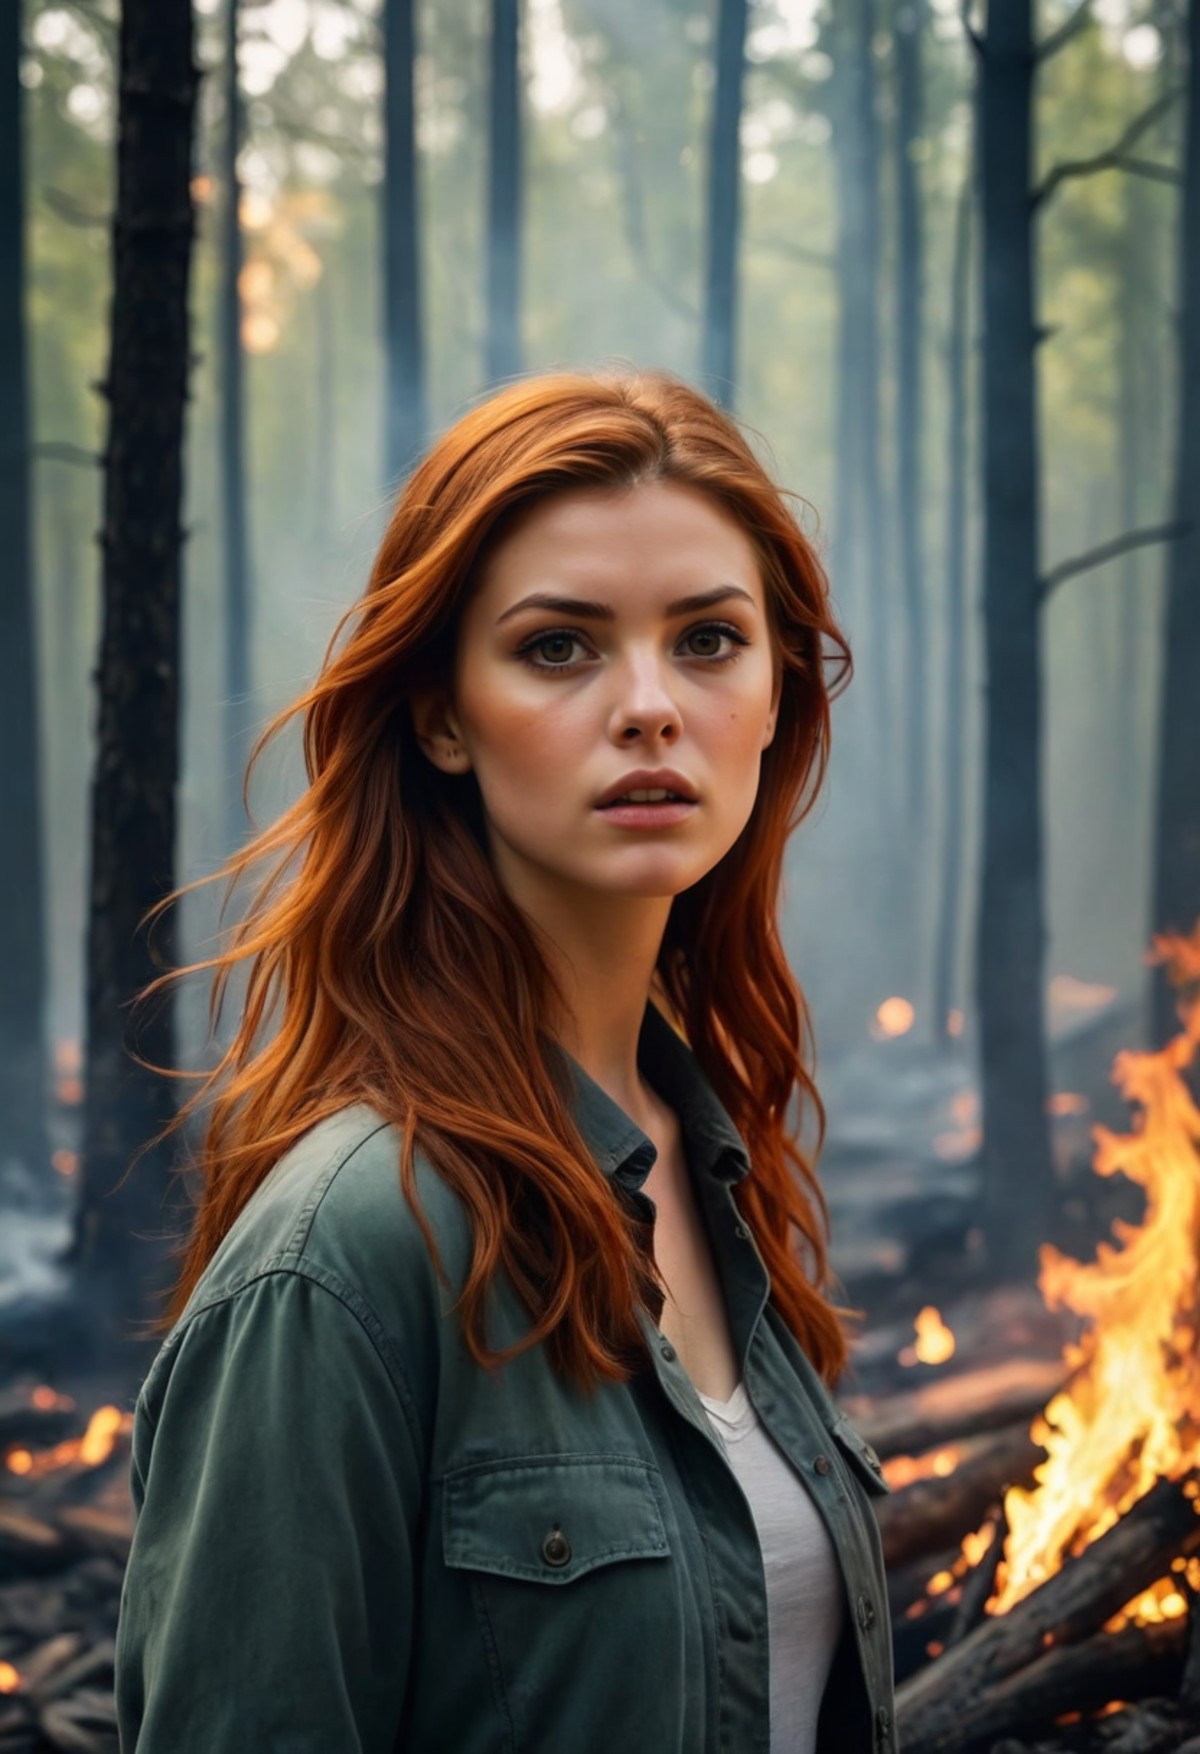 A girl with fiery red hair stands amidst a raging forest fire, her face illuminated by the flames and smoke billows around...